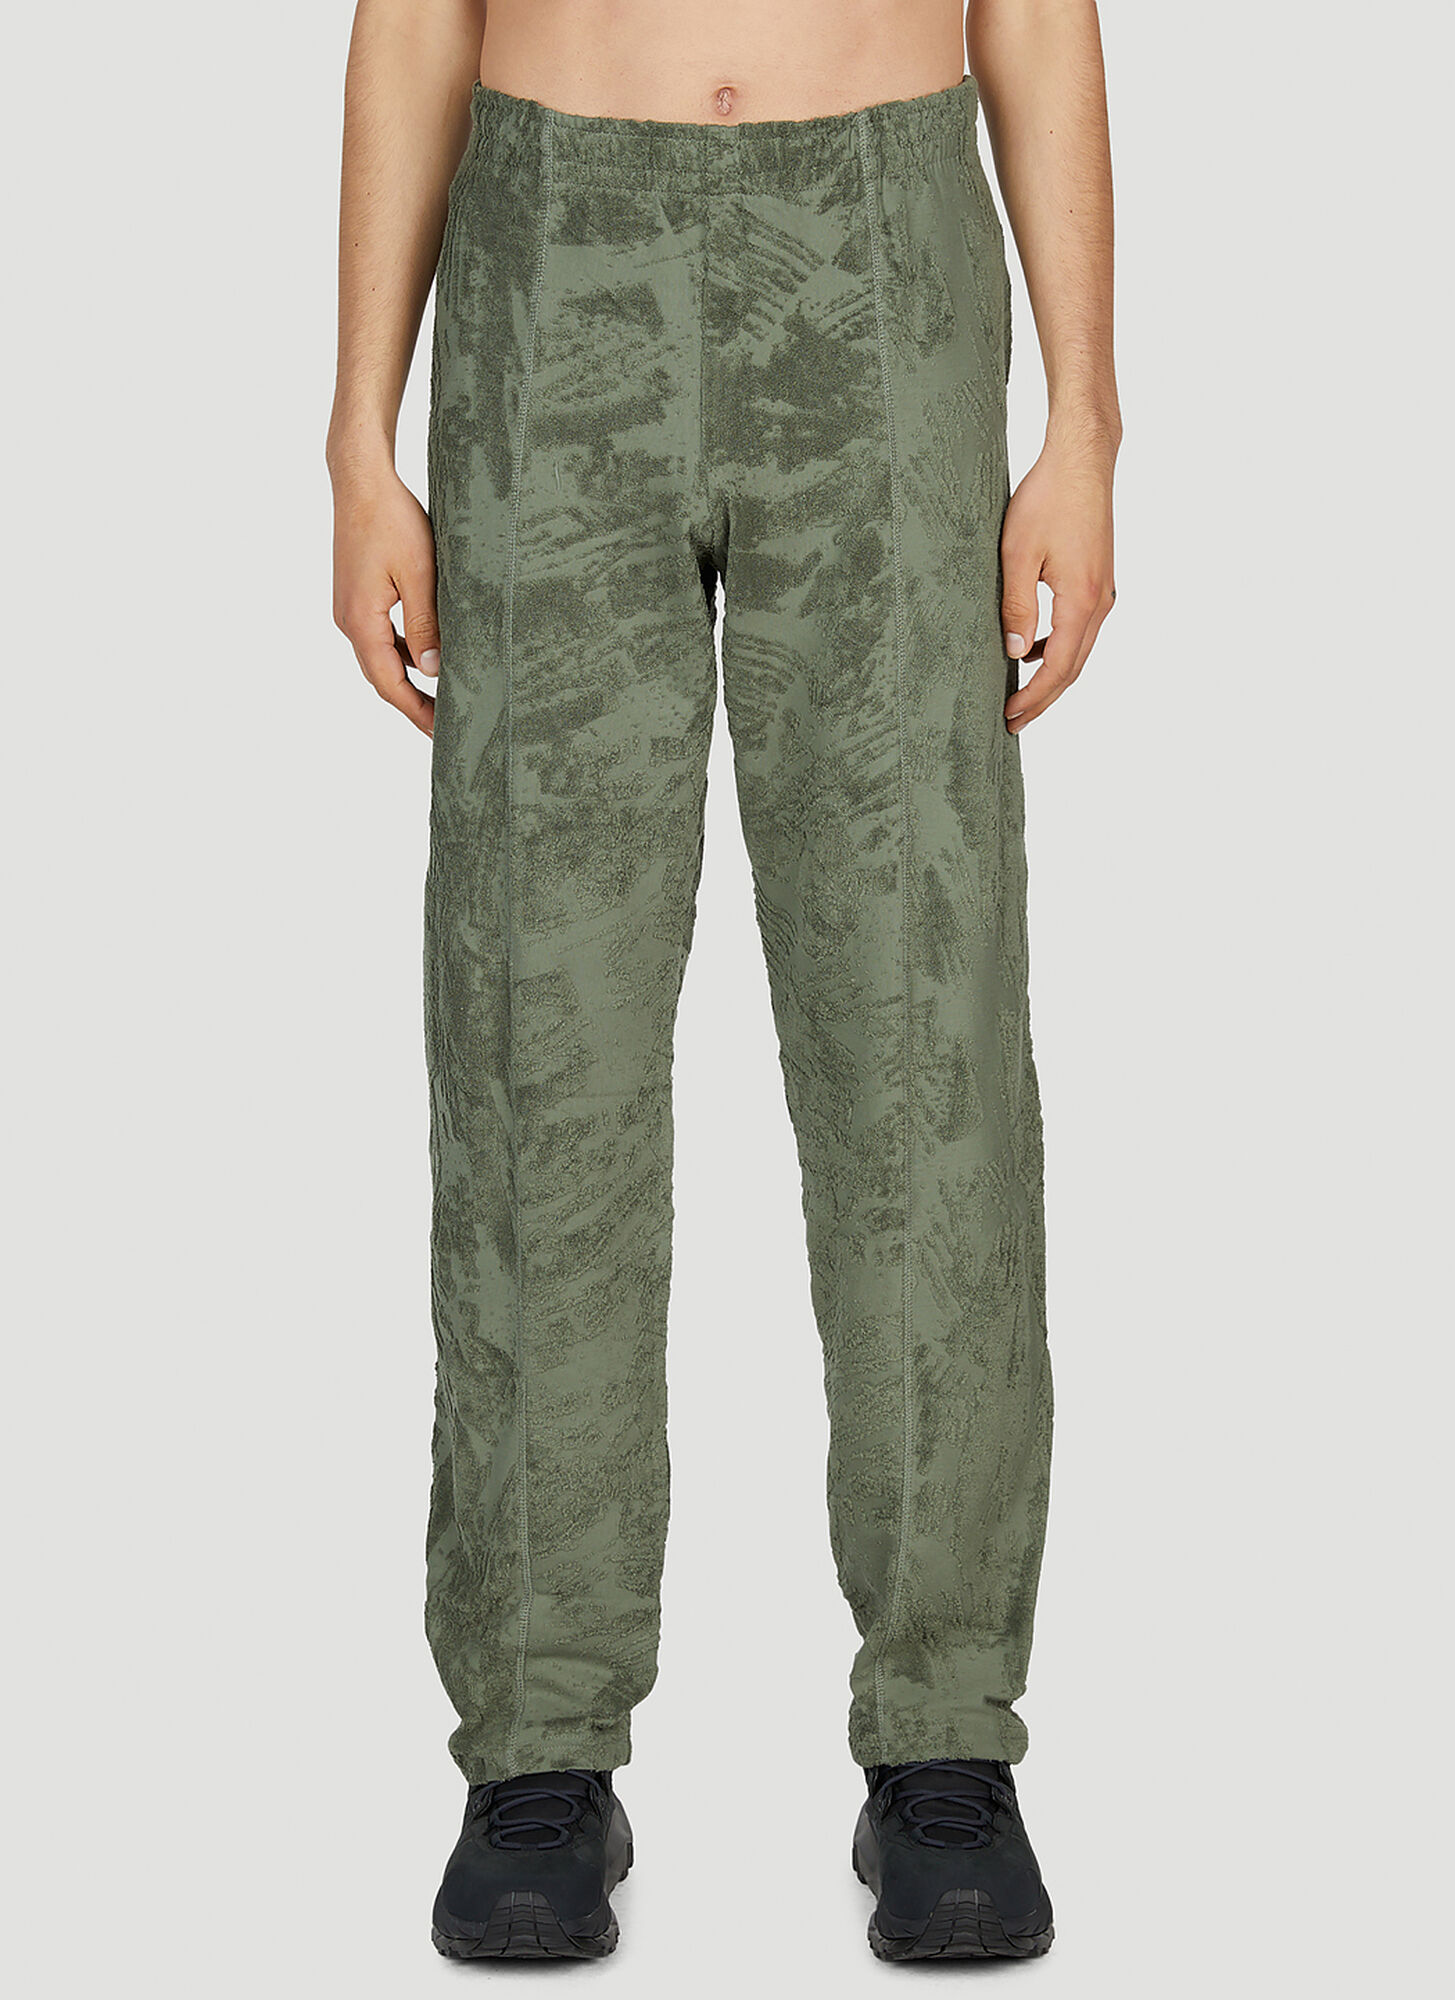 Affxwrks Purge Balance Pants Male Green In Grey